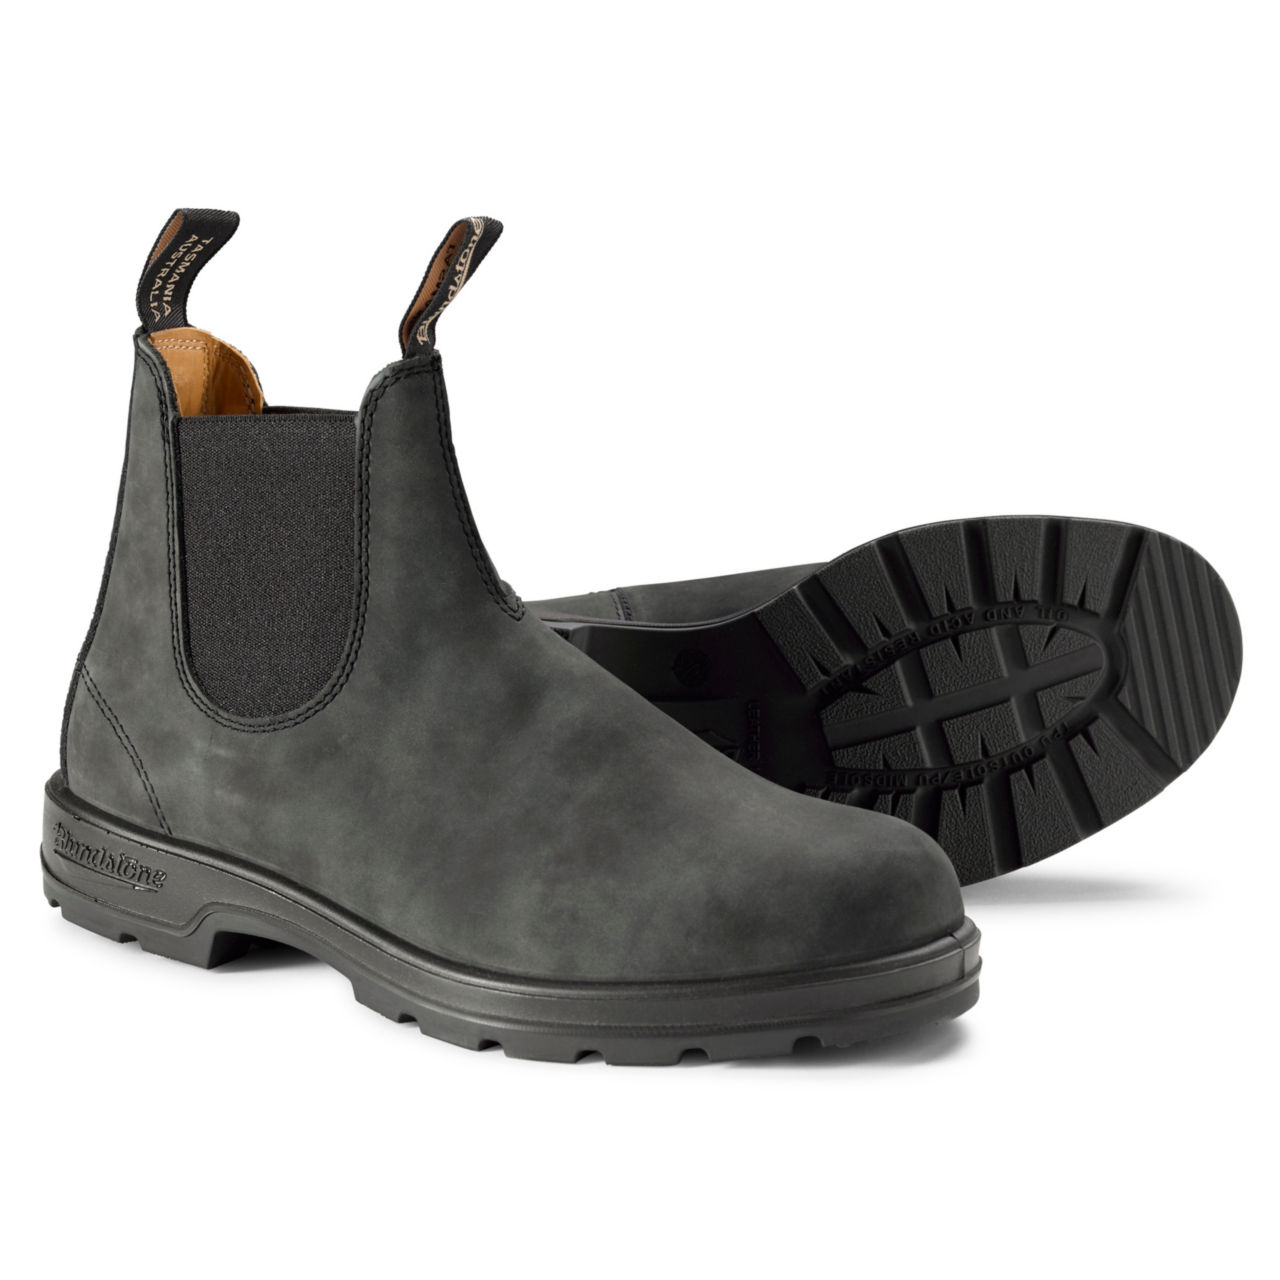 Blundstone® 585 Boots - RUSTIC BLACK image number 0